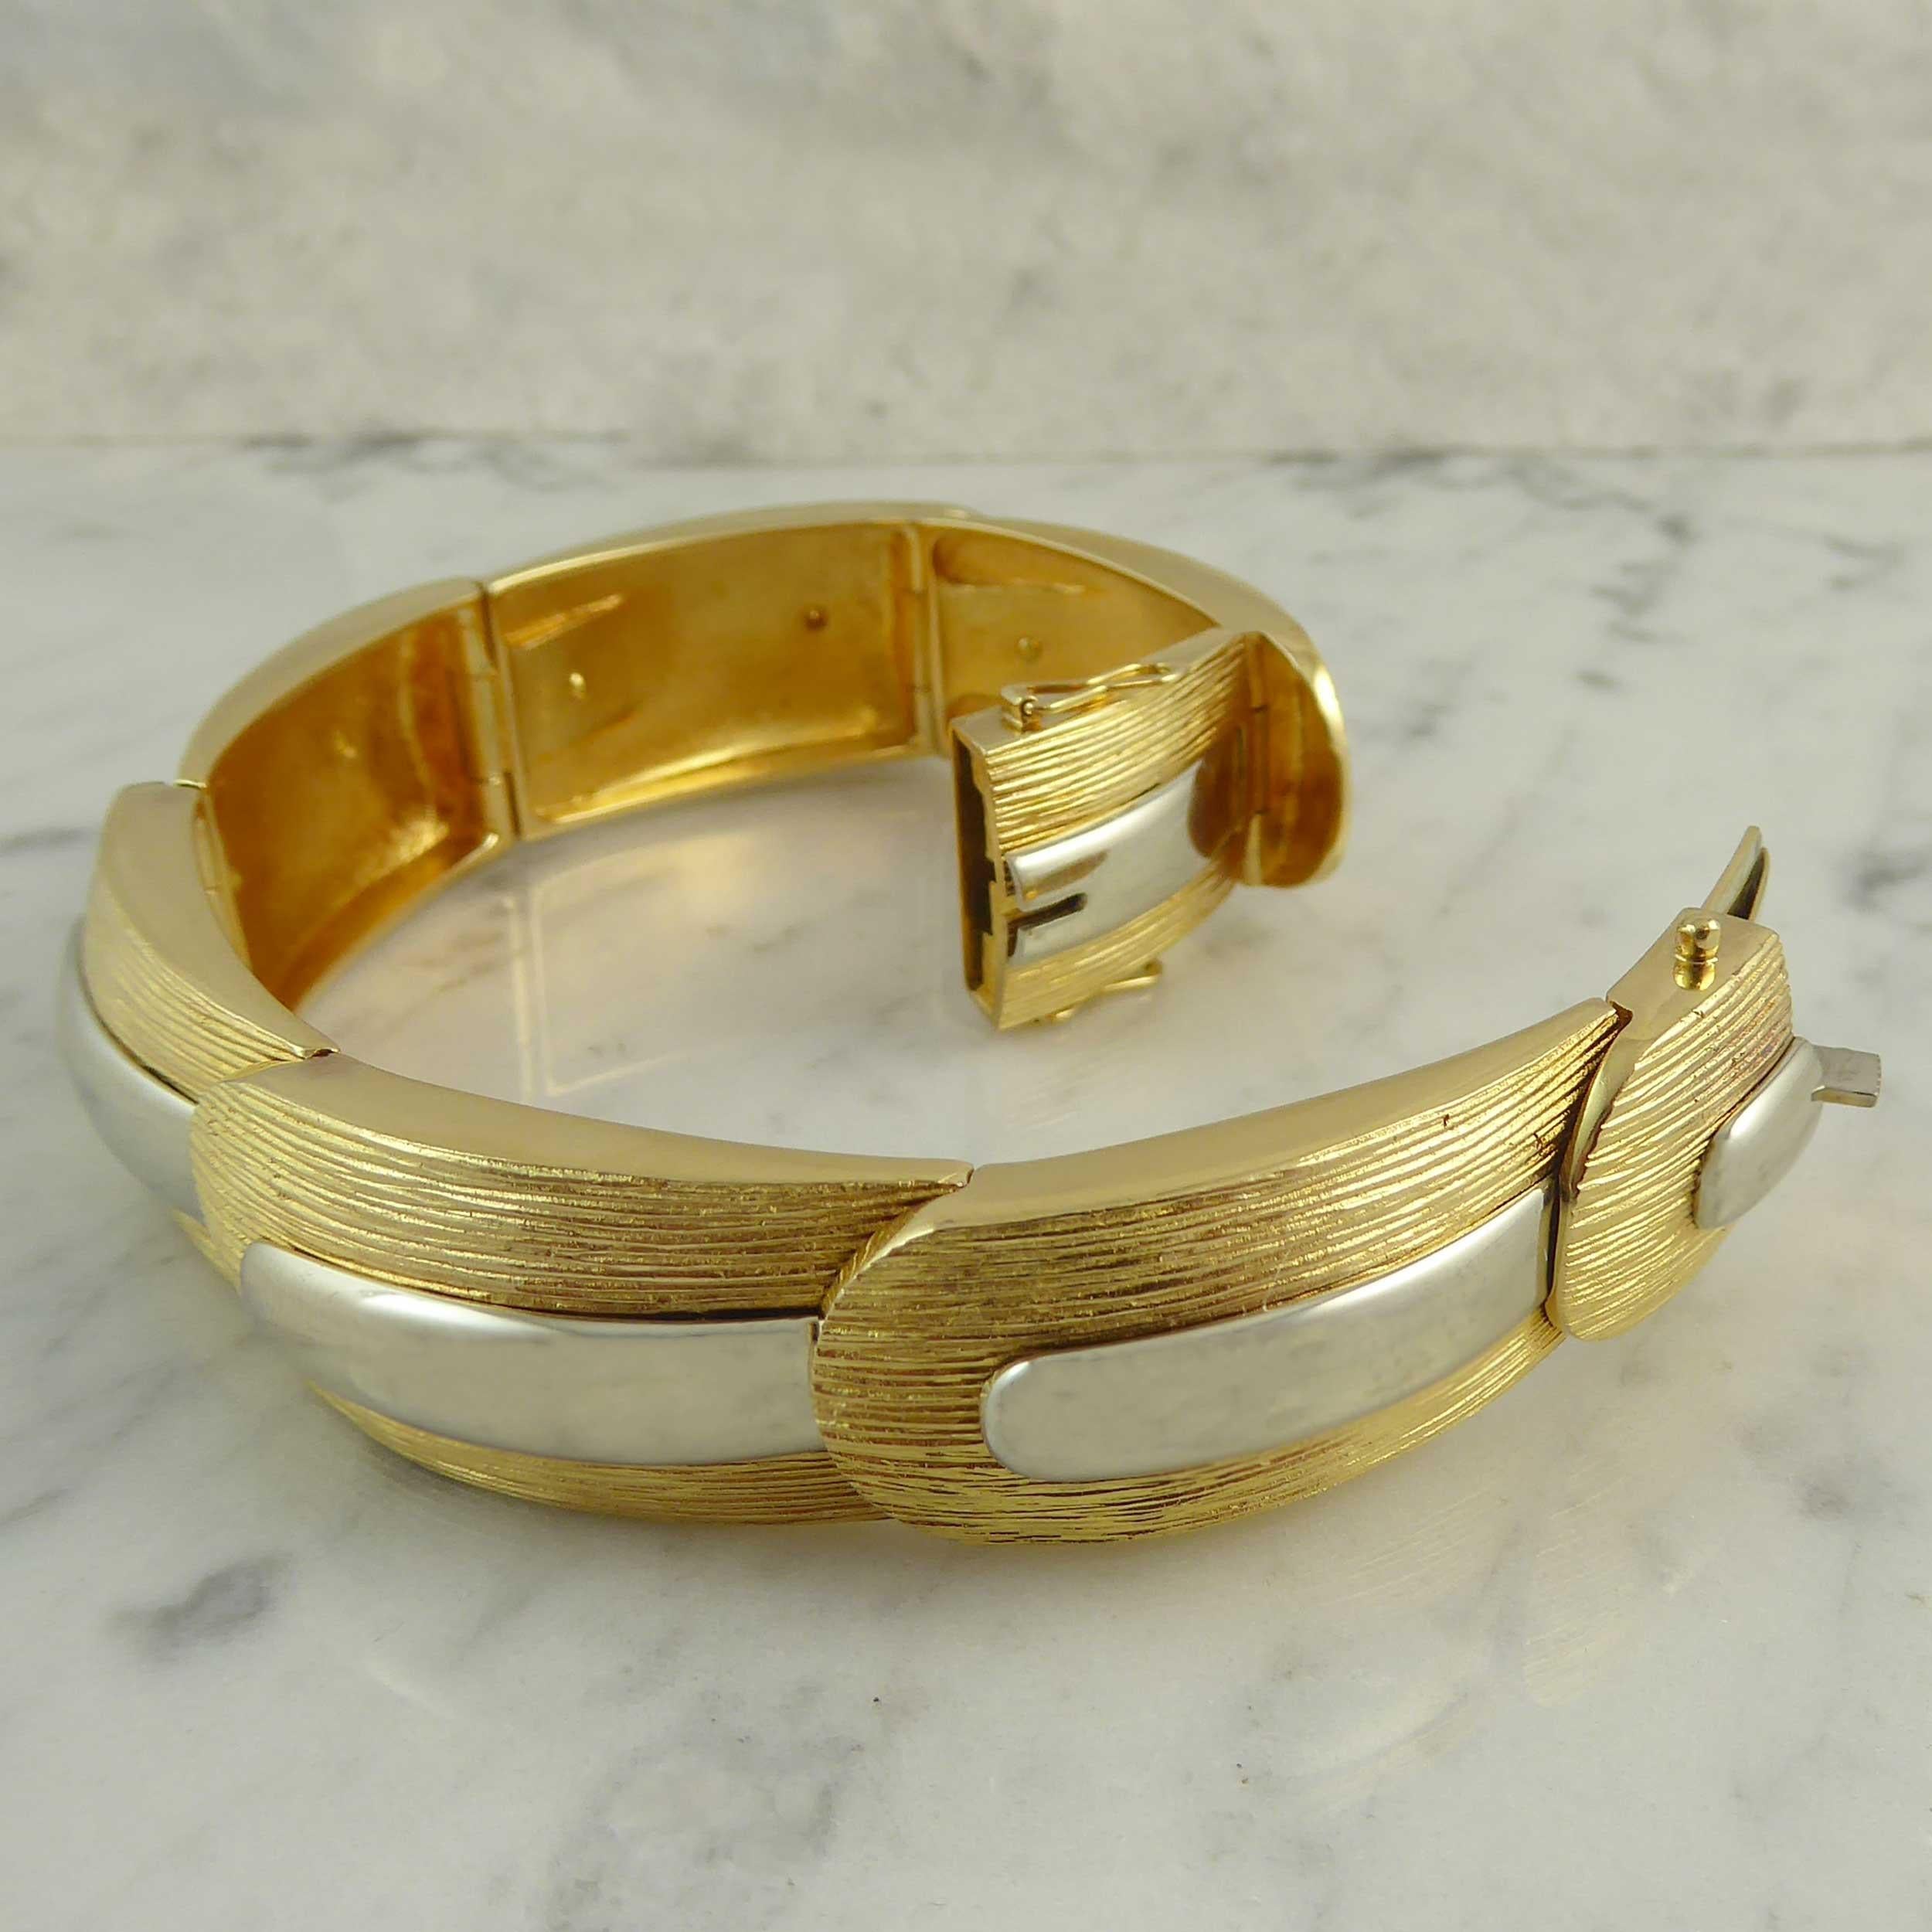 Women's Vintage Designer Bracelet 1974, Lapponia Finland, Yellow and White Gold, Nordic For Sale